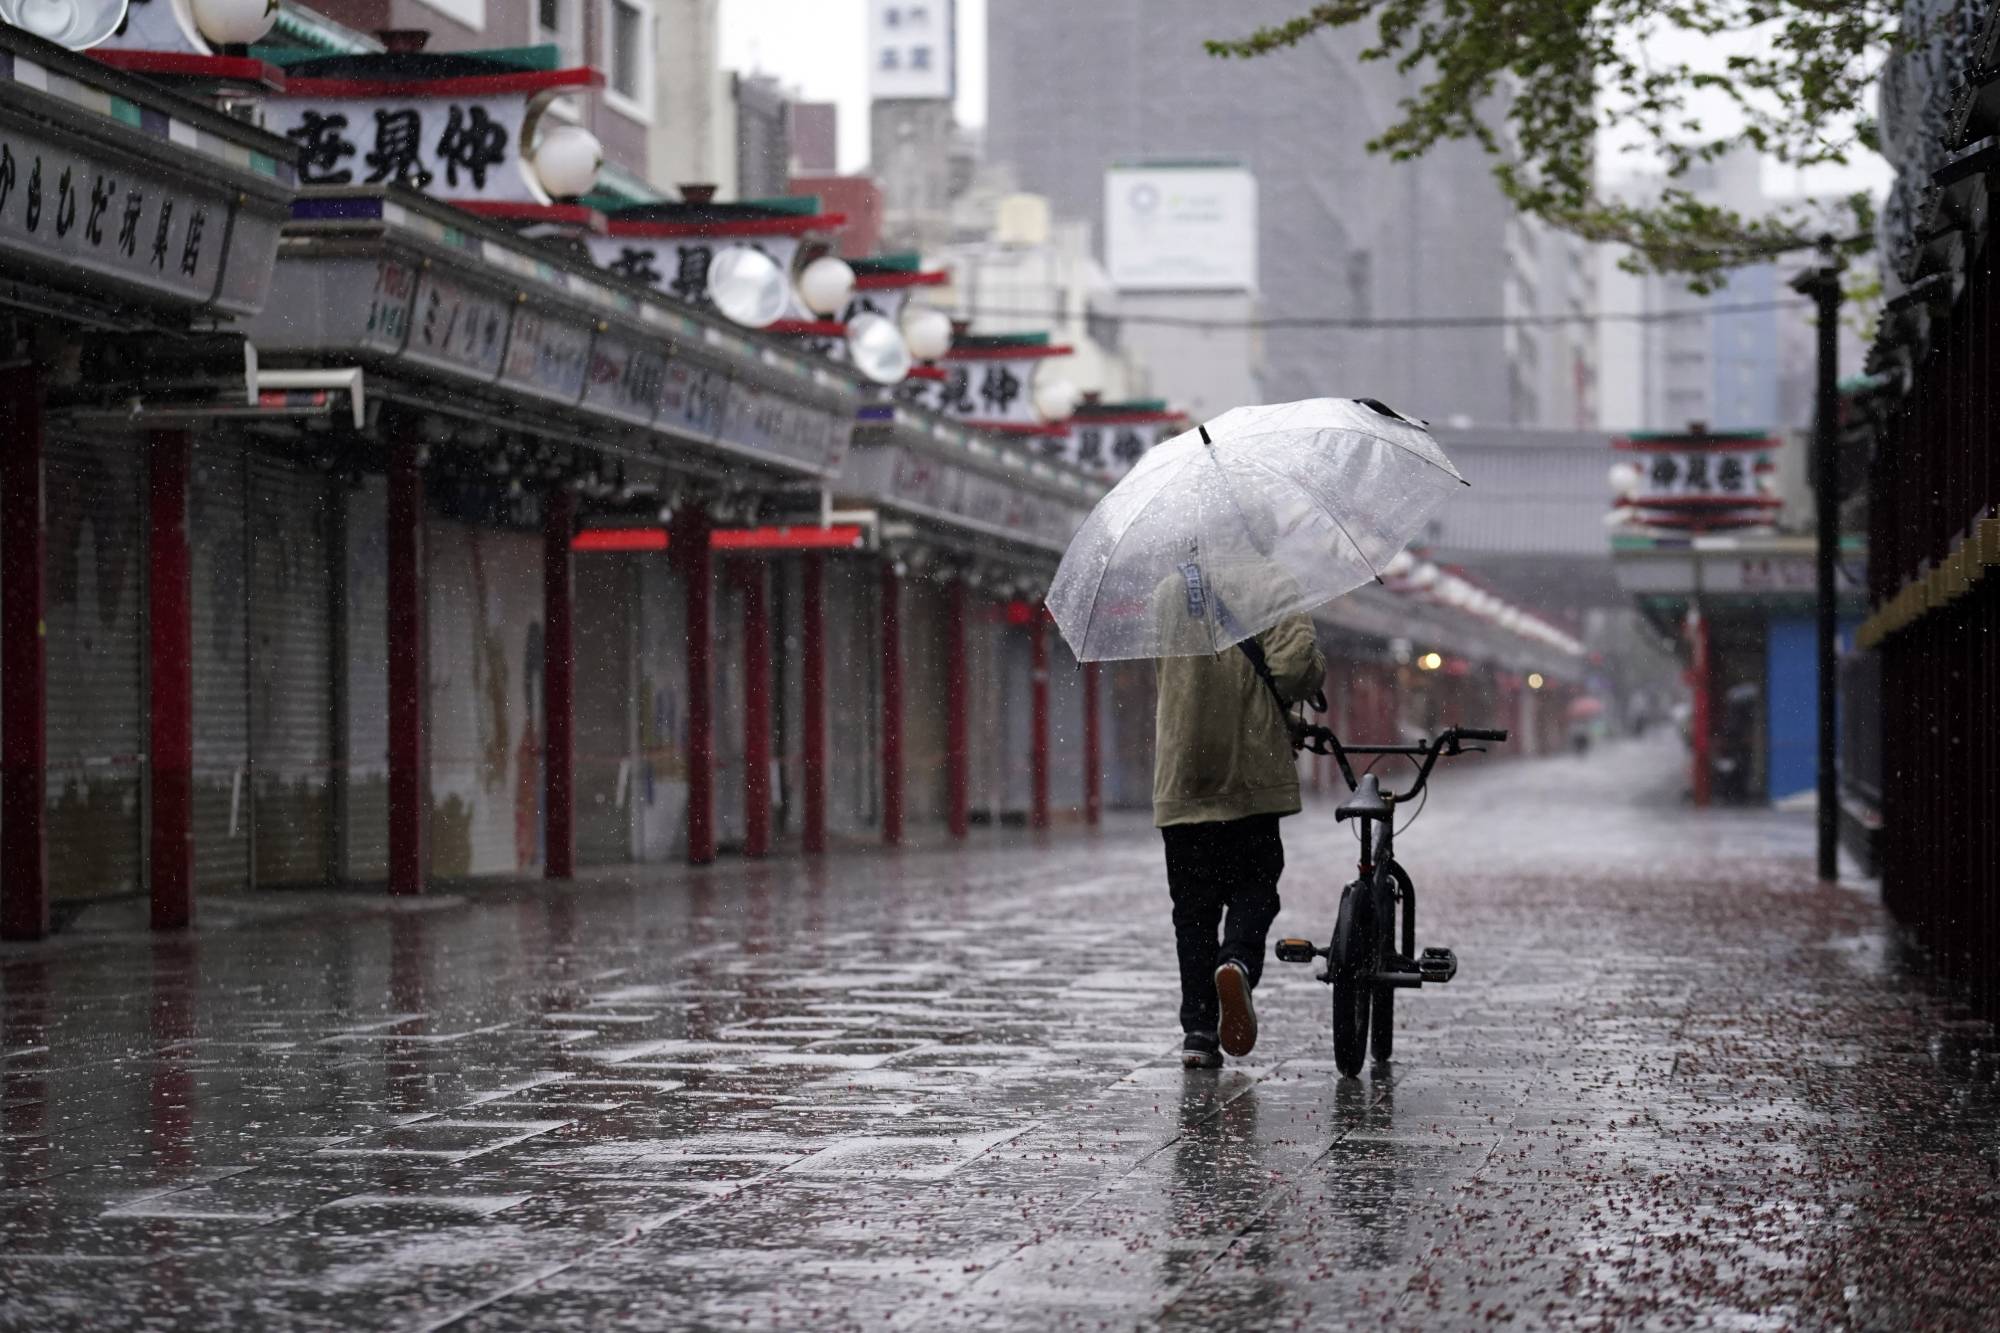 A man walks along a deserted street inTokyo’s Asakusa district on Monday. Prime MinisterShinzo Abe declared a state of emergency last week for Tokyo and six other prefectures to helpprevent the spread of COVID-19. | AP